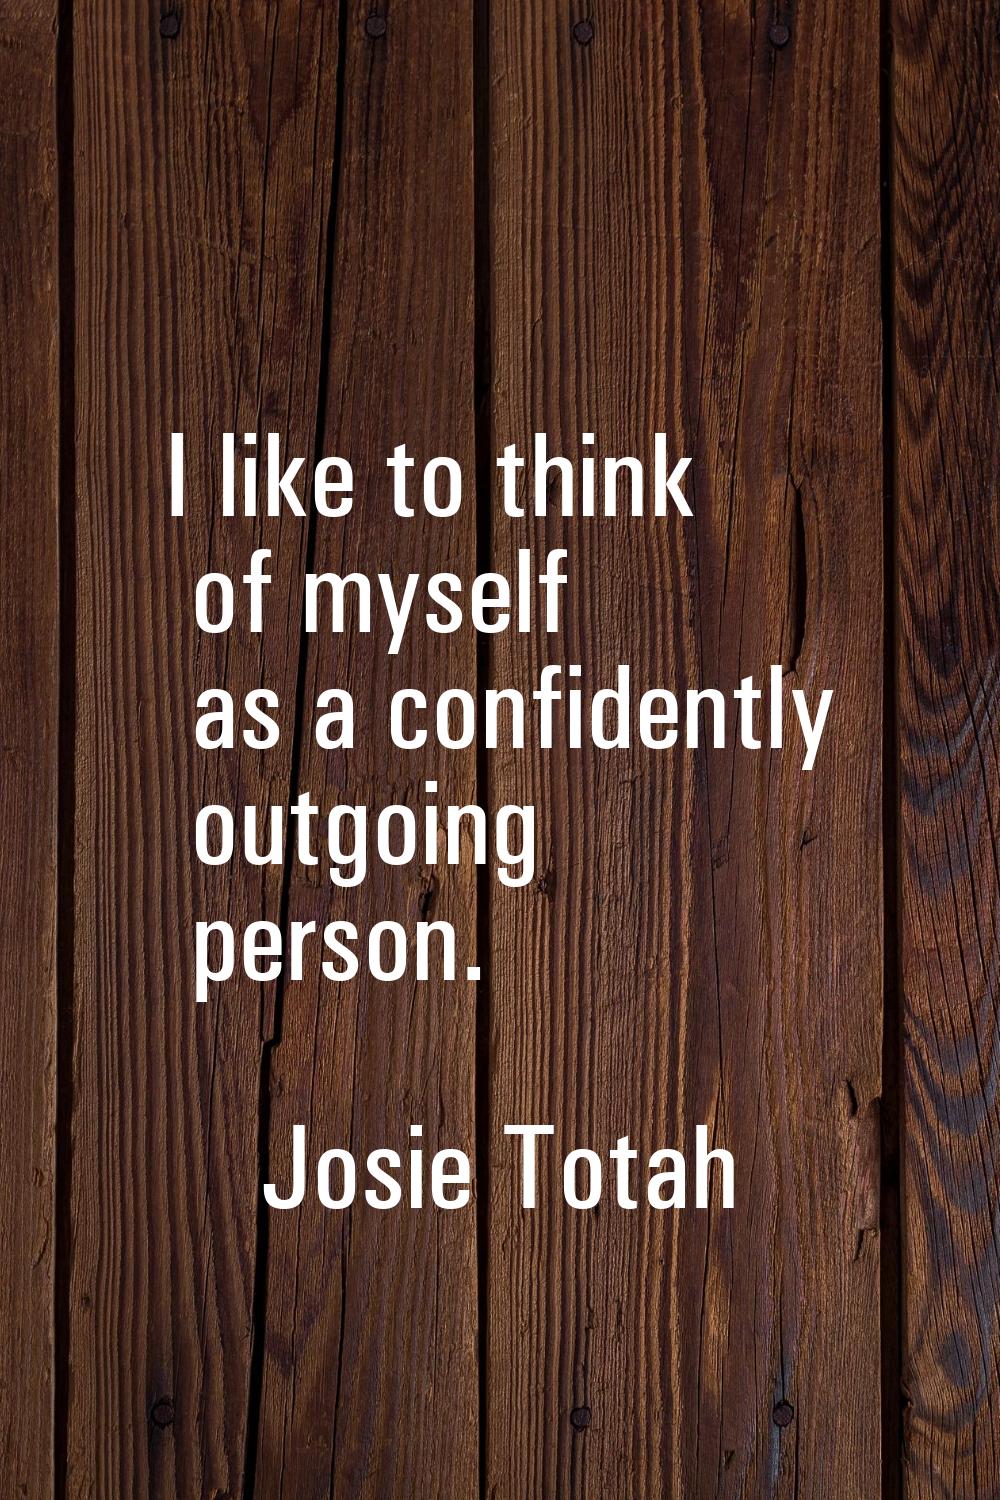 I like to think of myself as a confidently outgoing person.